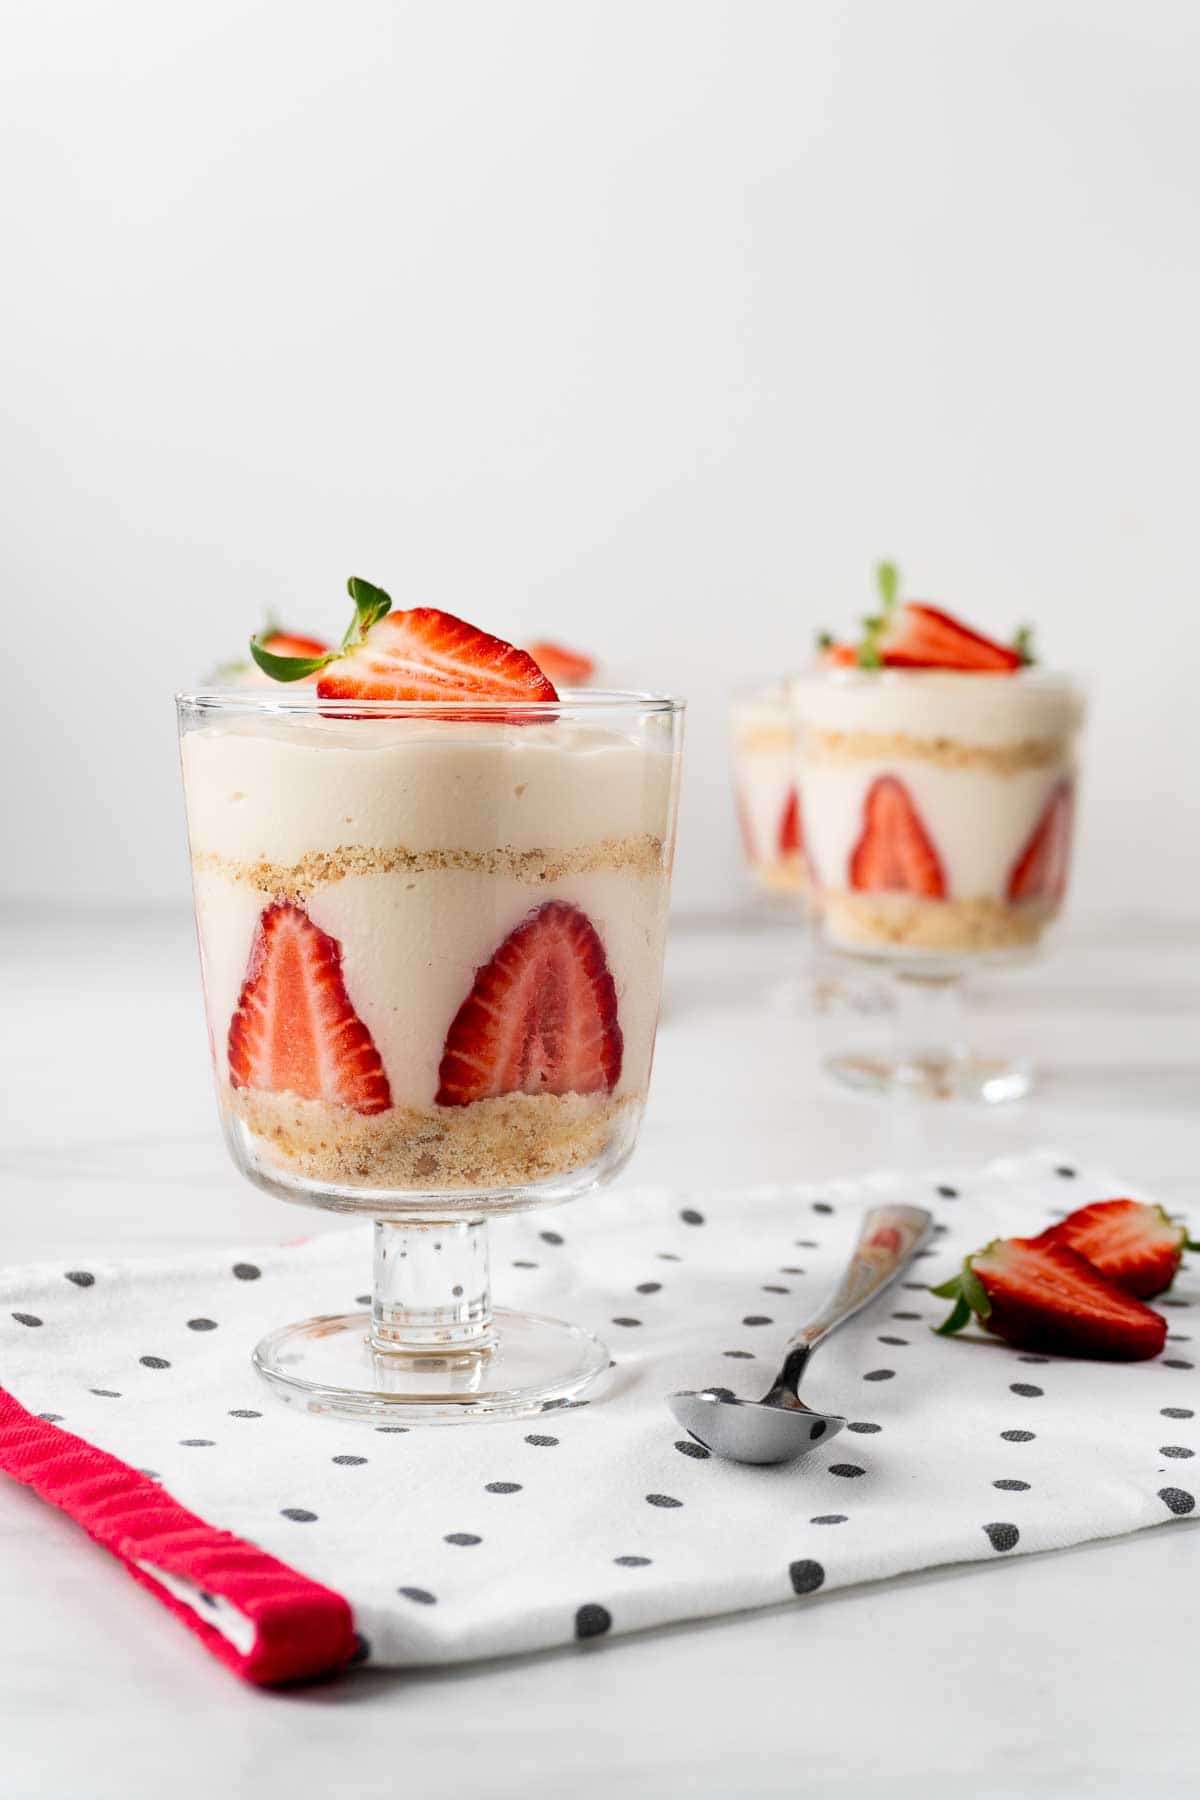 A dessert glass filled with a Turkish strawberry magnolia pudding, made using fresh strawberries.